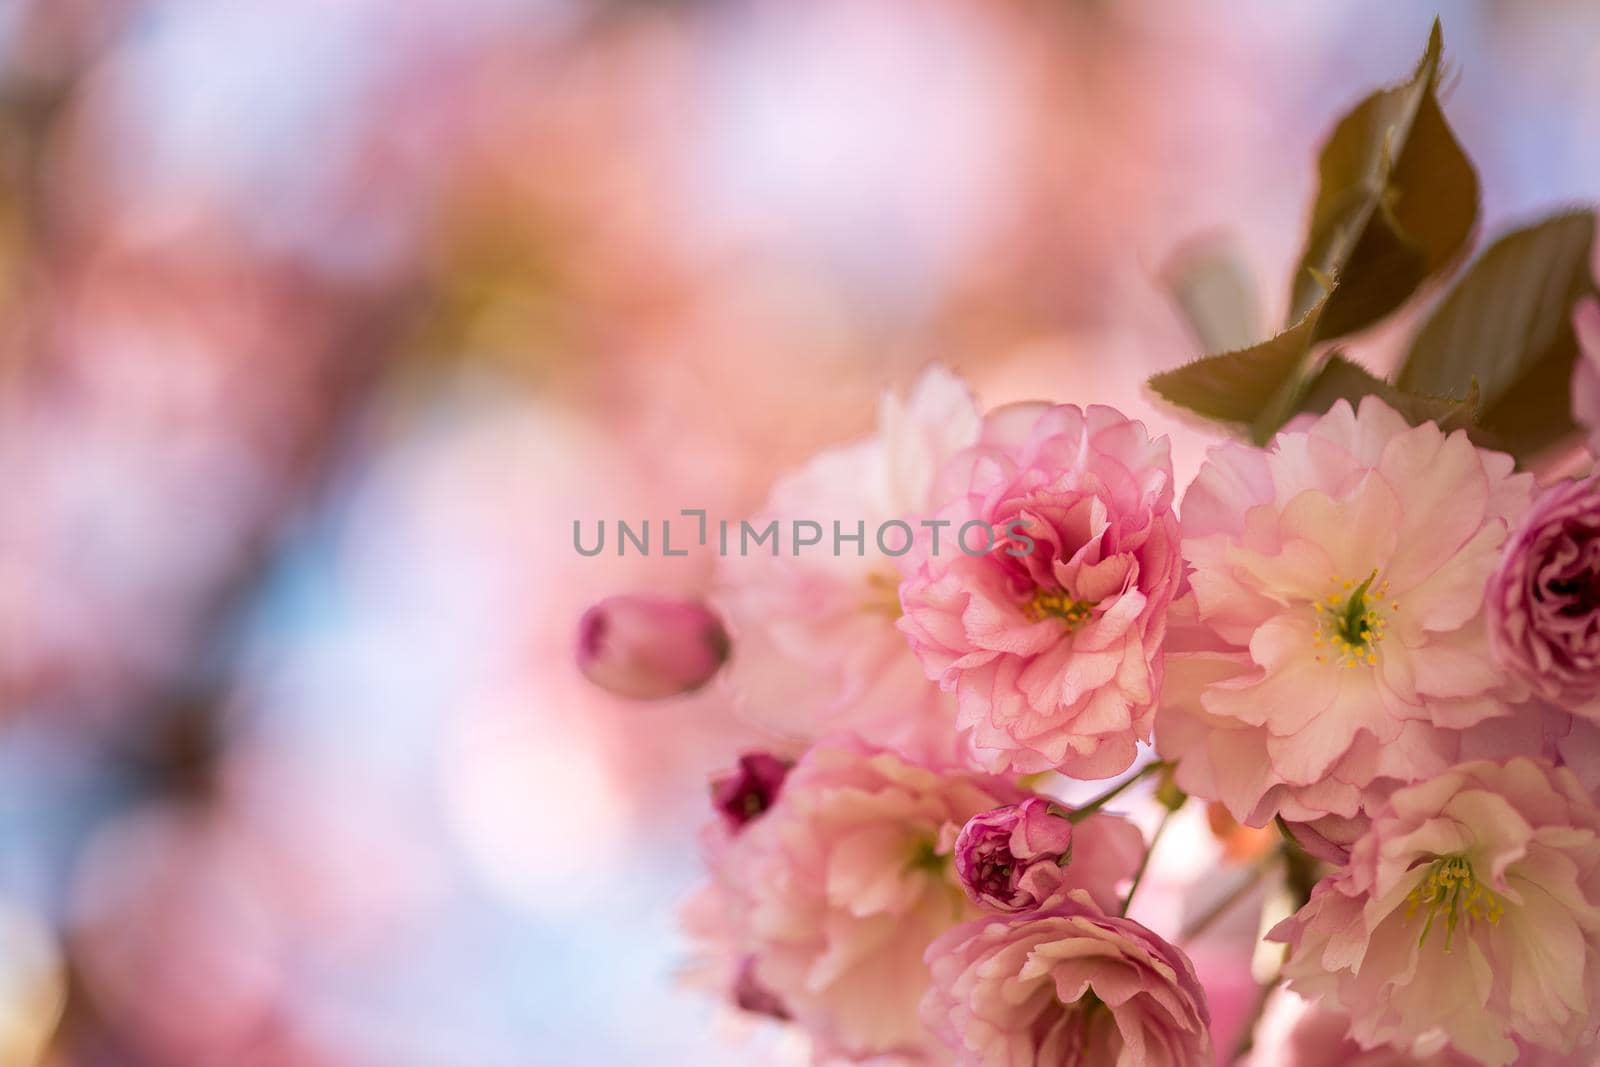 Springtime: Blooming tree with pink blossoms, beauty by Daxenbichler